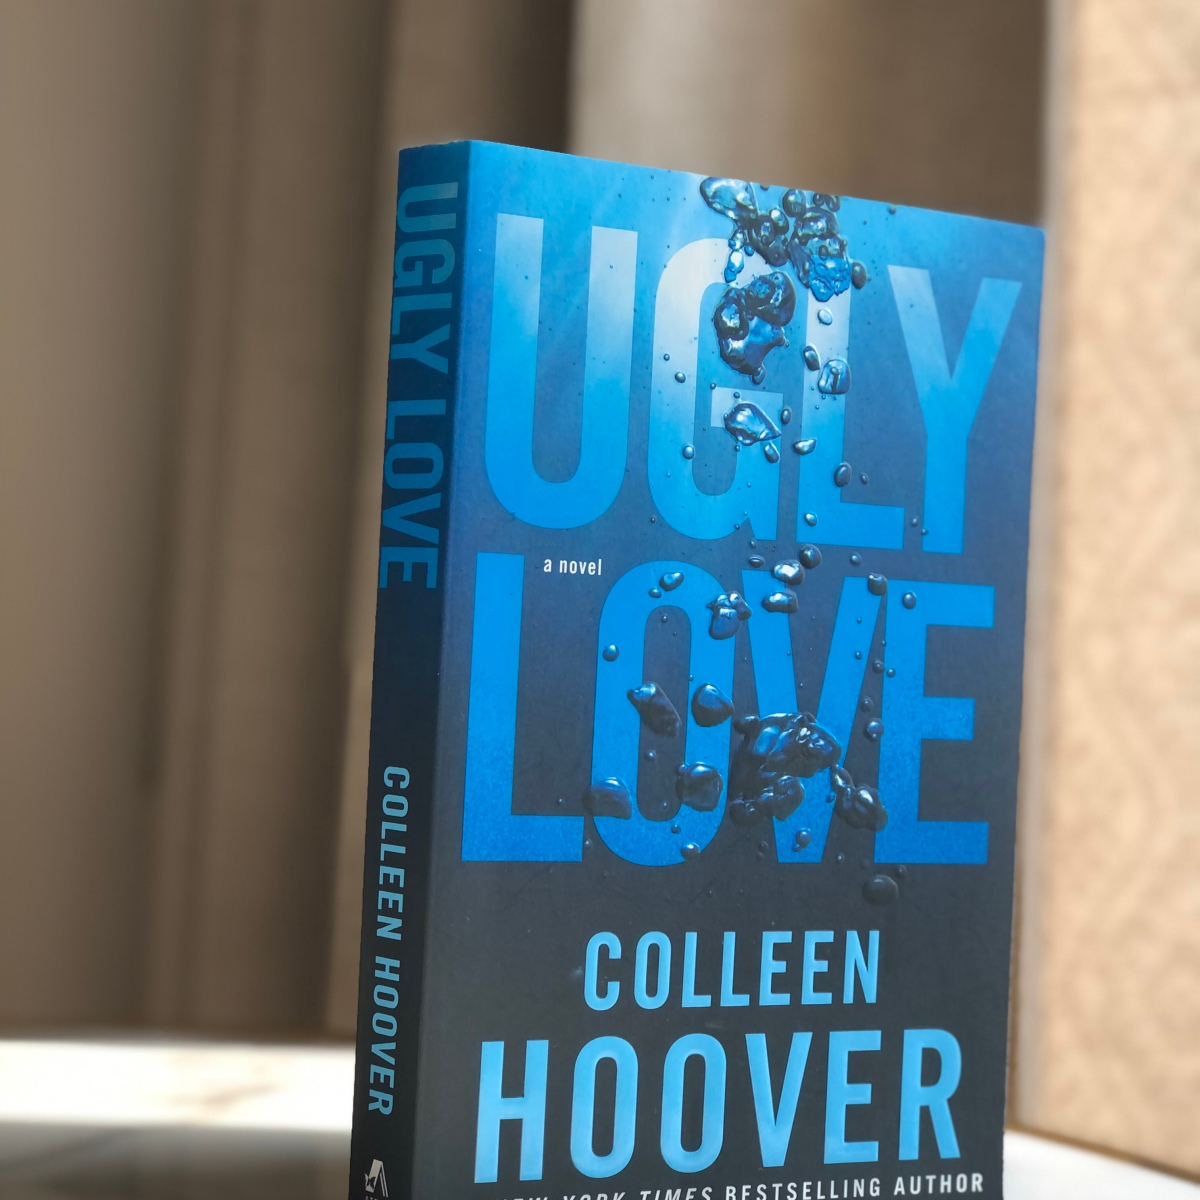 UGLY LOVE by Colleen Hoover